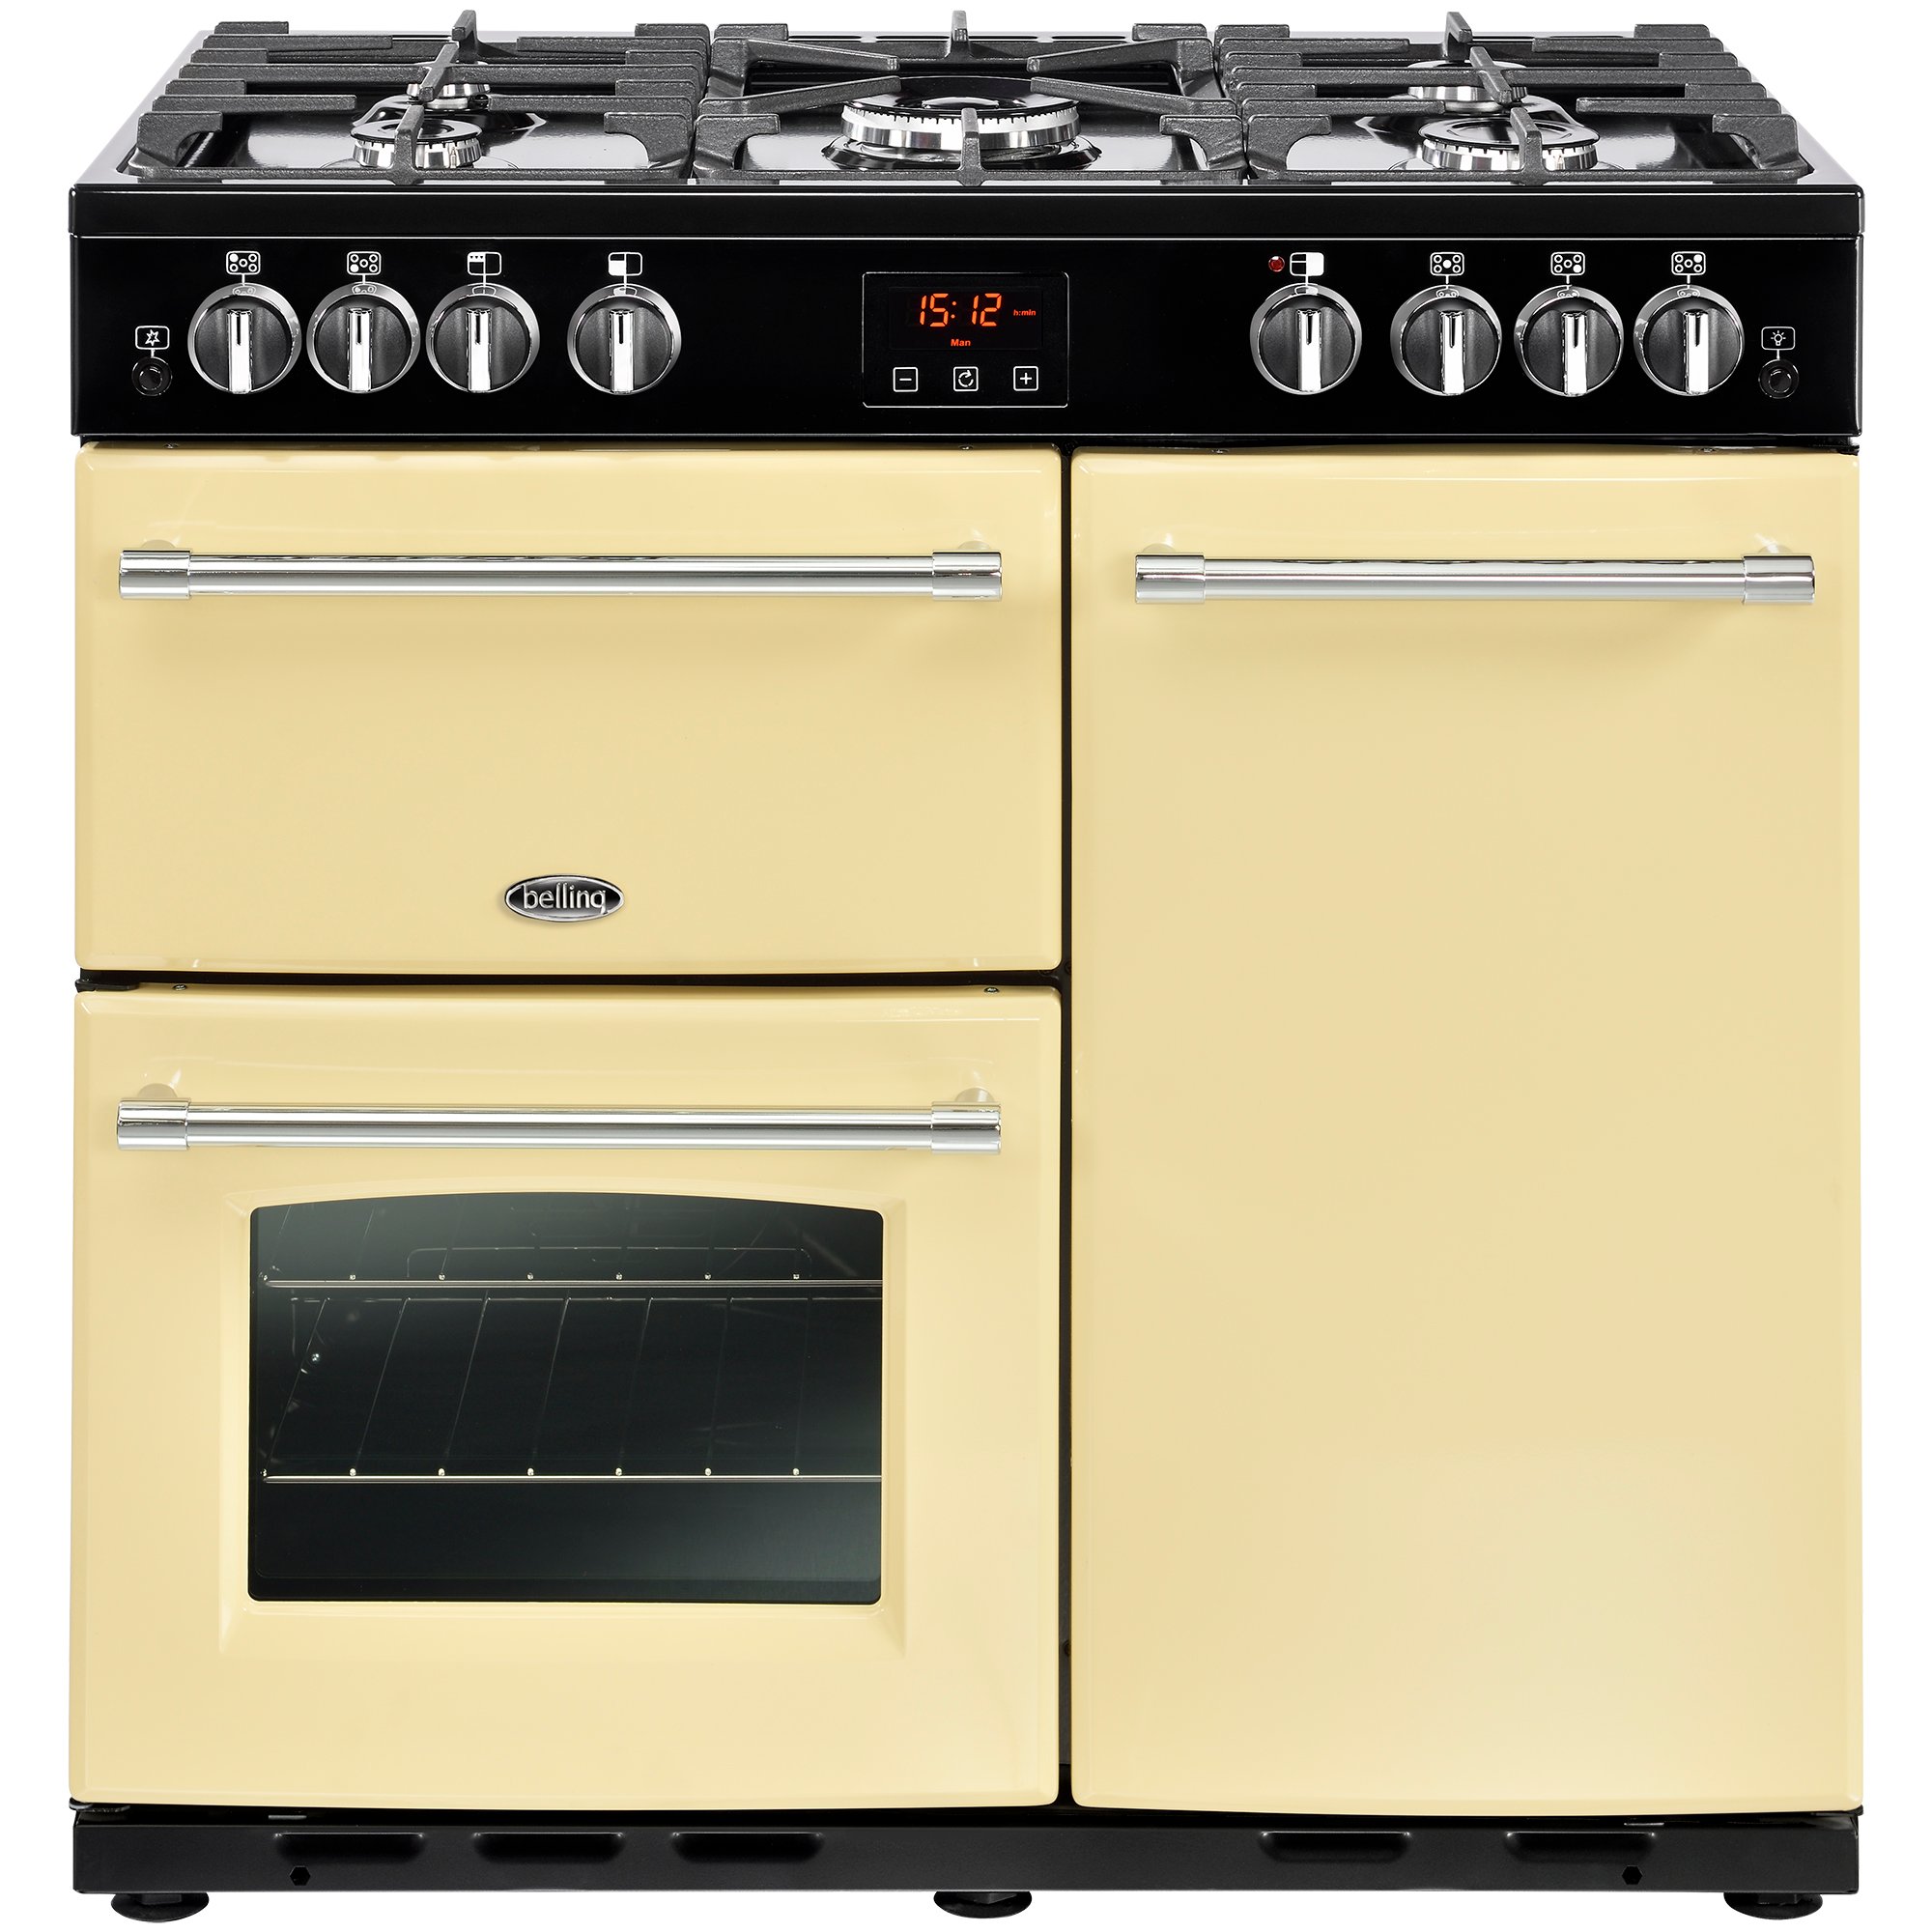 90cm gas range cooker with 4kW PowerWok burner, Maxi-Clock, market leading tall oven and easy clean enamel.